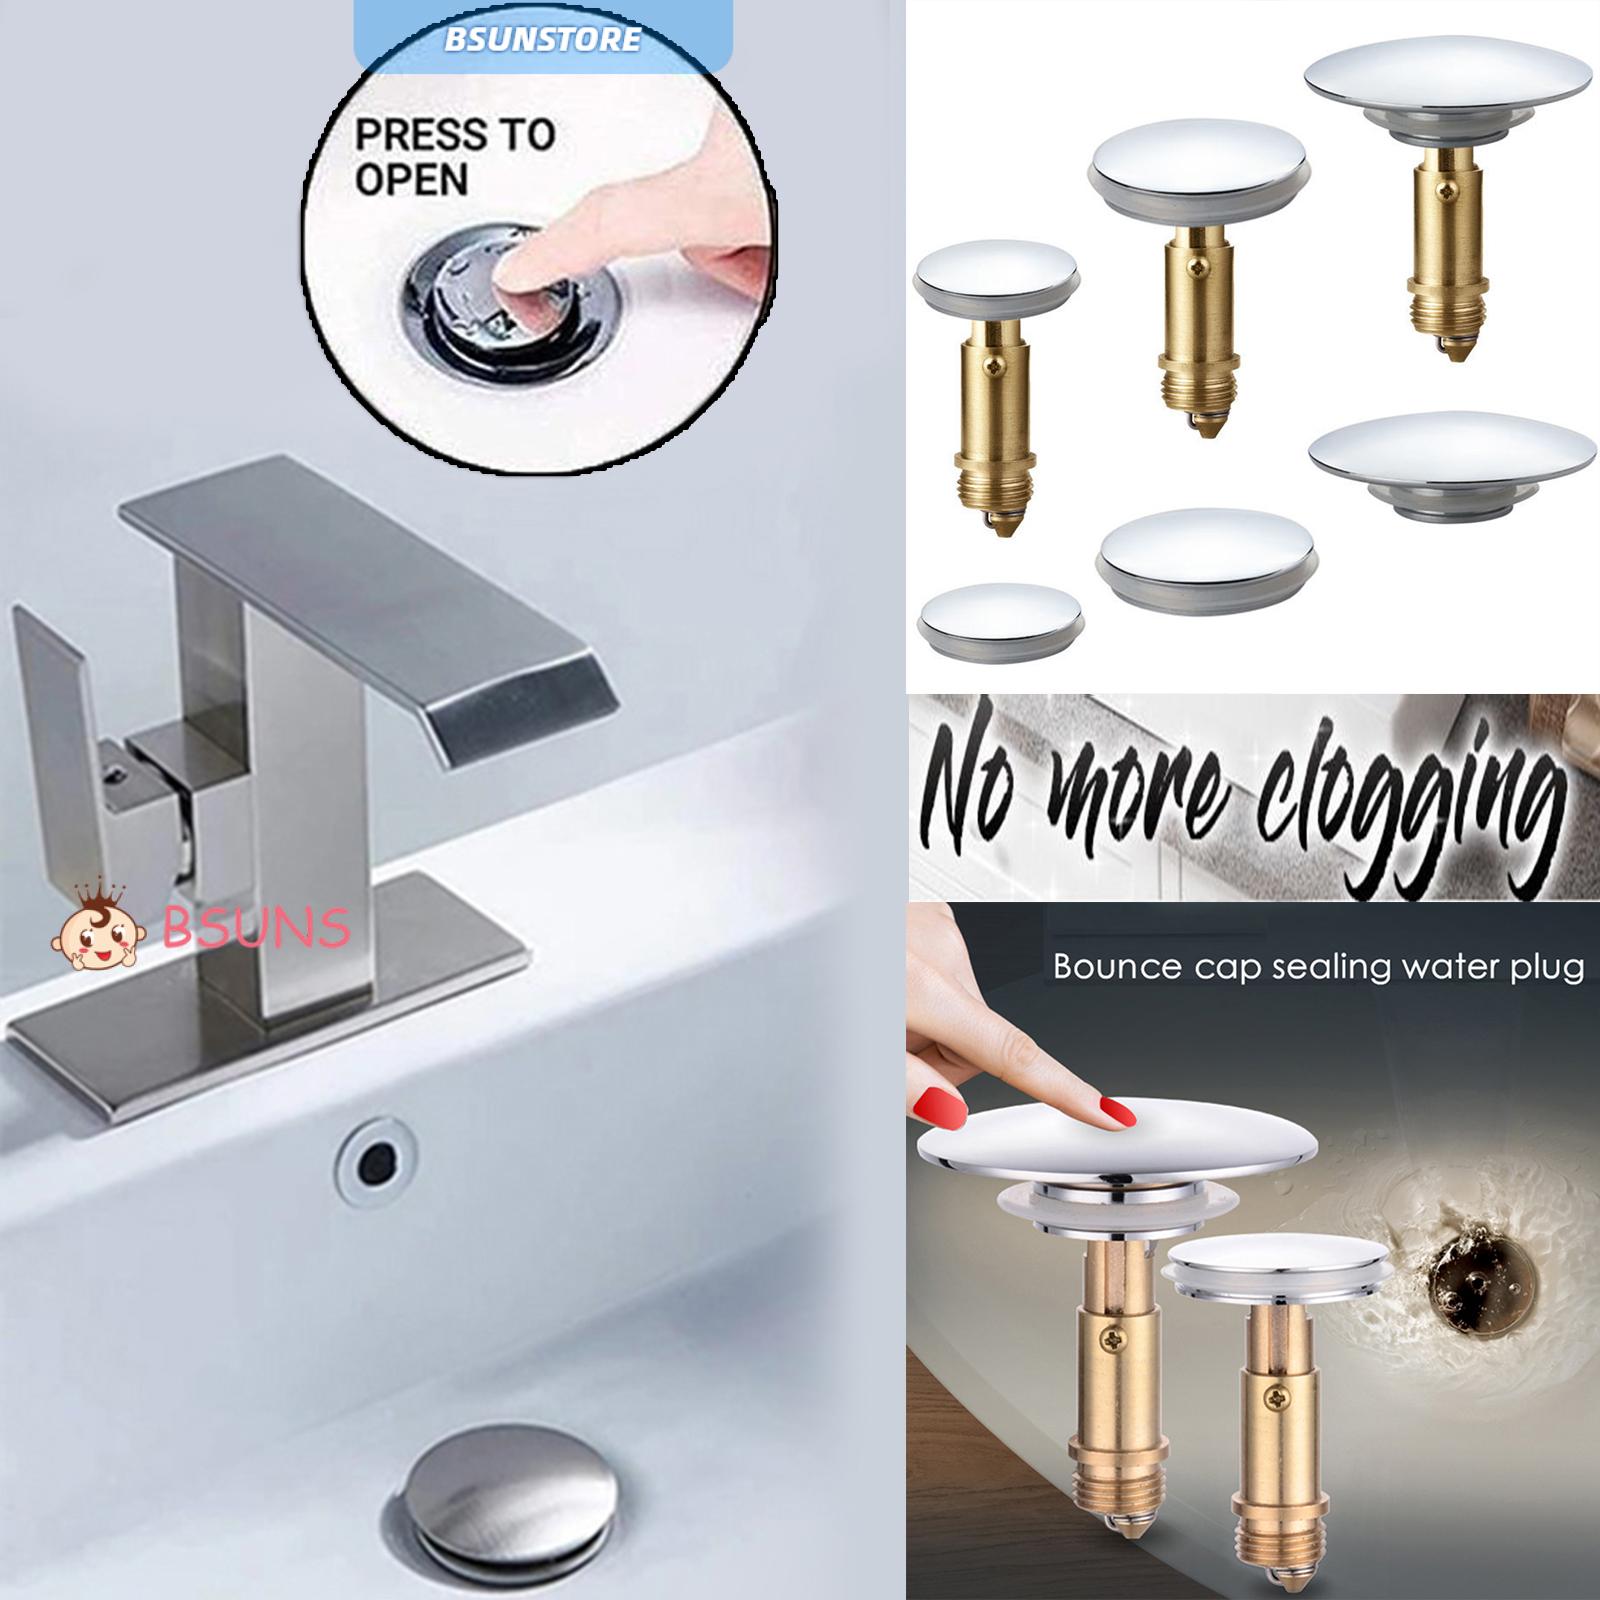 Bsuns Bathroom Accessories Wash Basin Bounce Drain Filter High Quality Material Push Up And Down Size Sink Drain Stopper Hot New Easy To Install Universal Explosion Proof Sink Drain Plug Shopee Indonesia